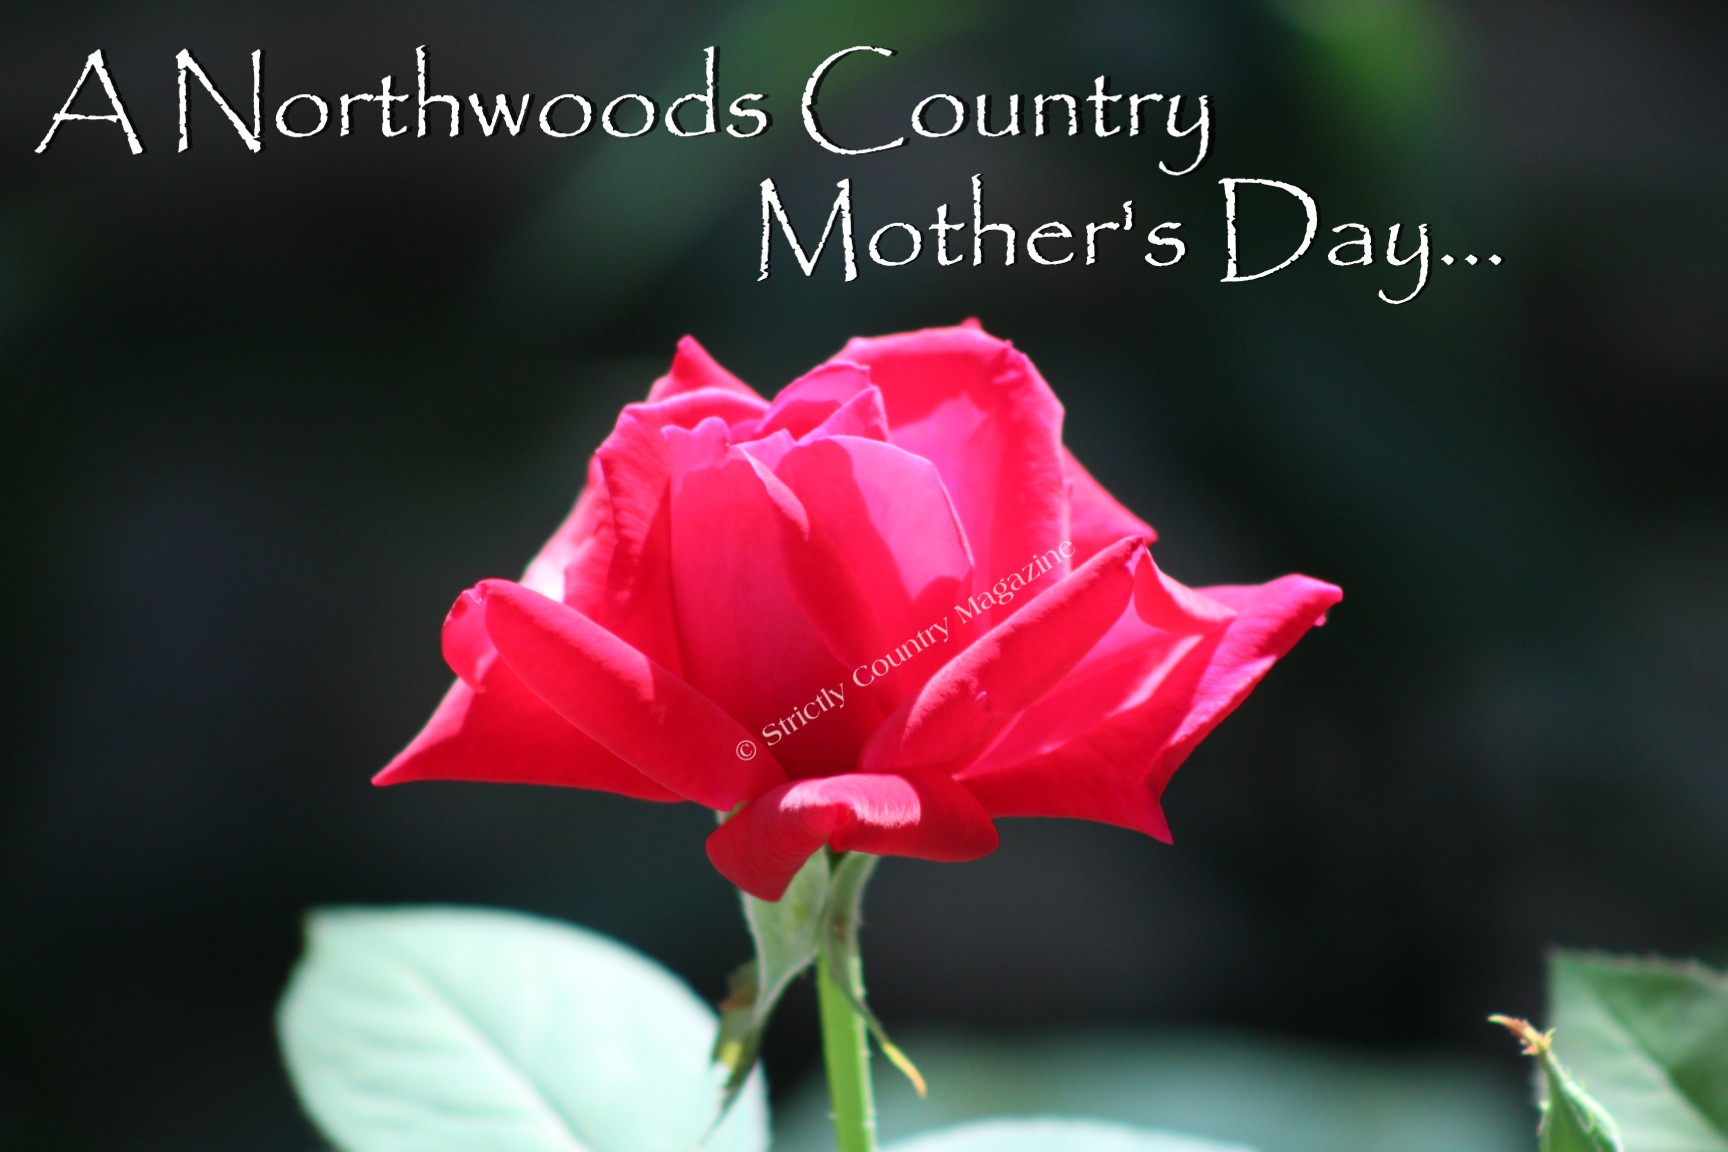 Strictly Country Copyright A Northwoods Country Mother's Day title